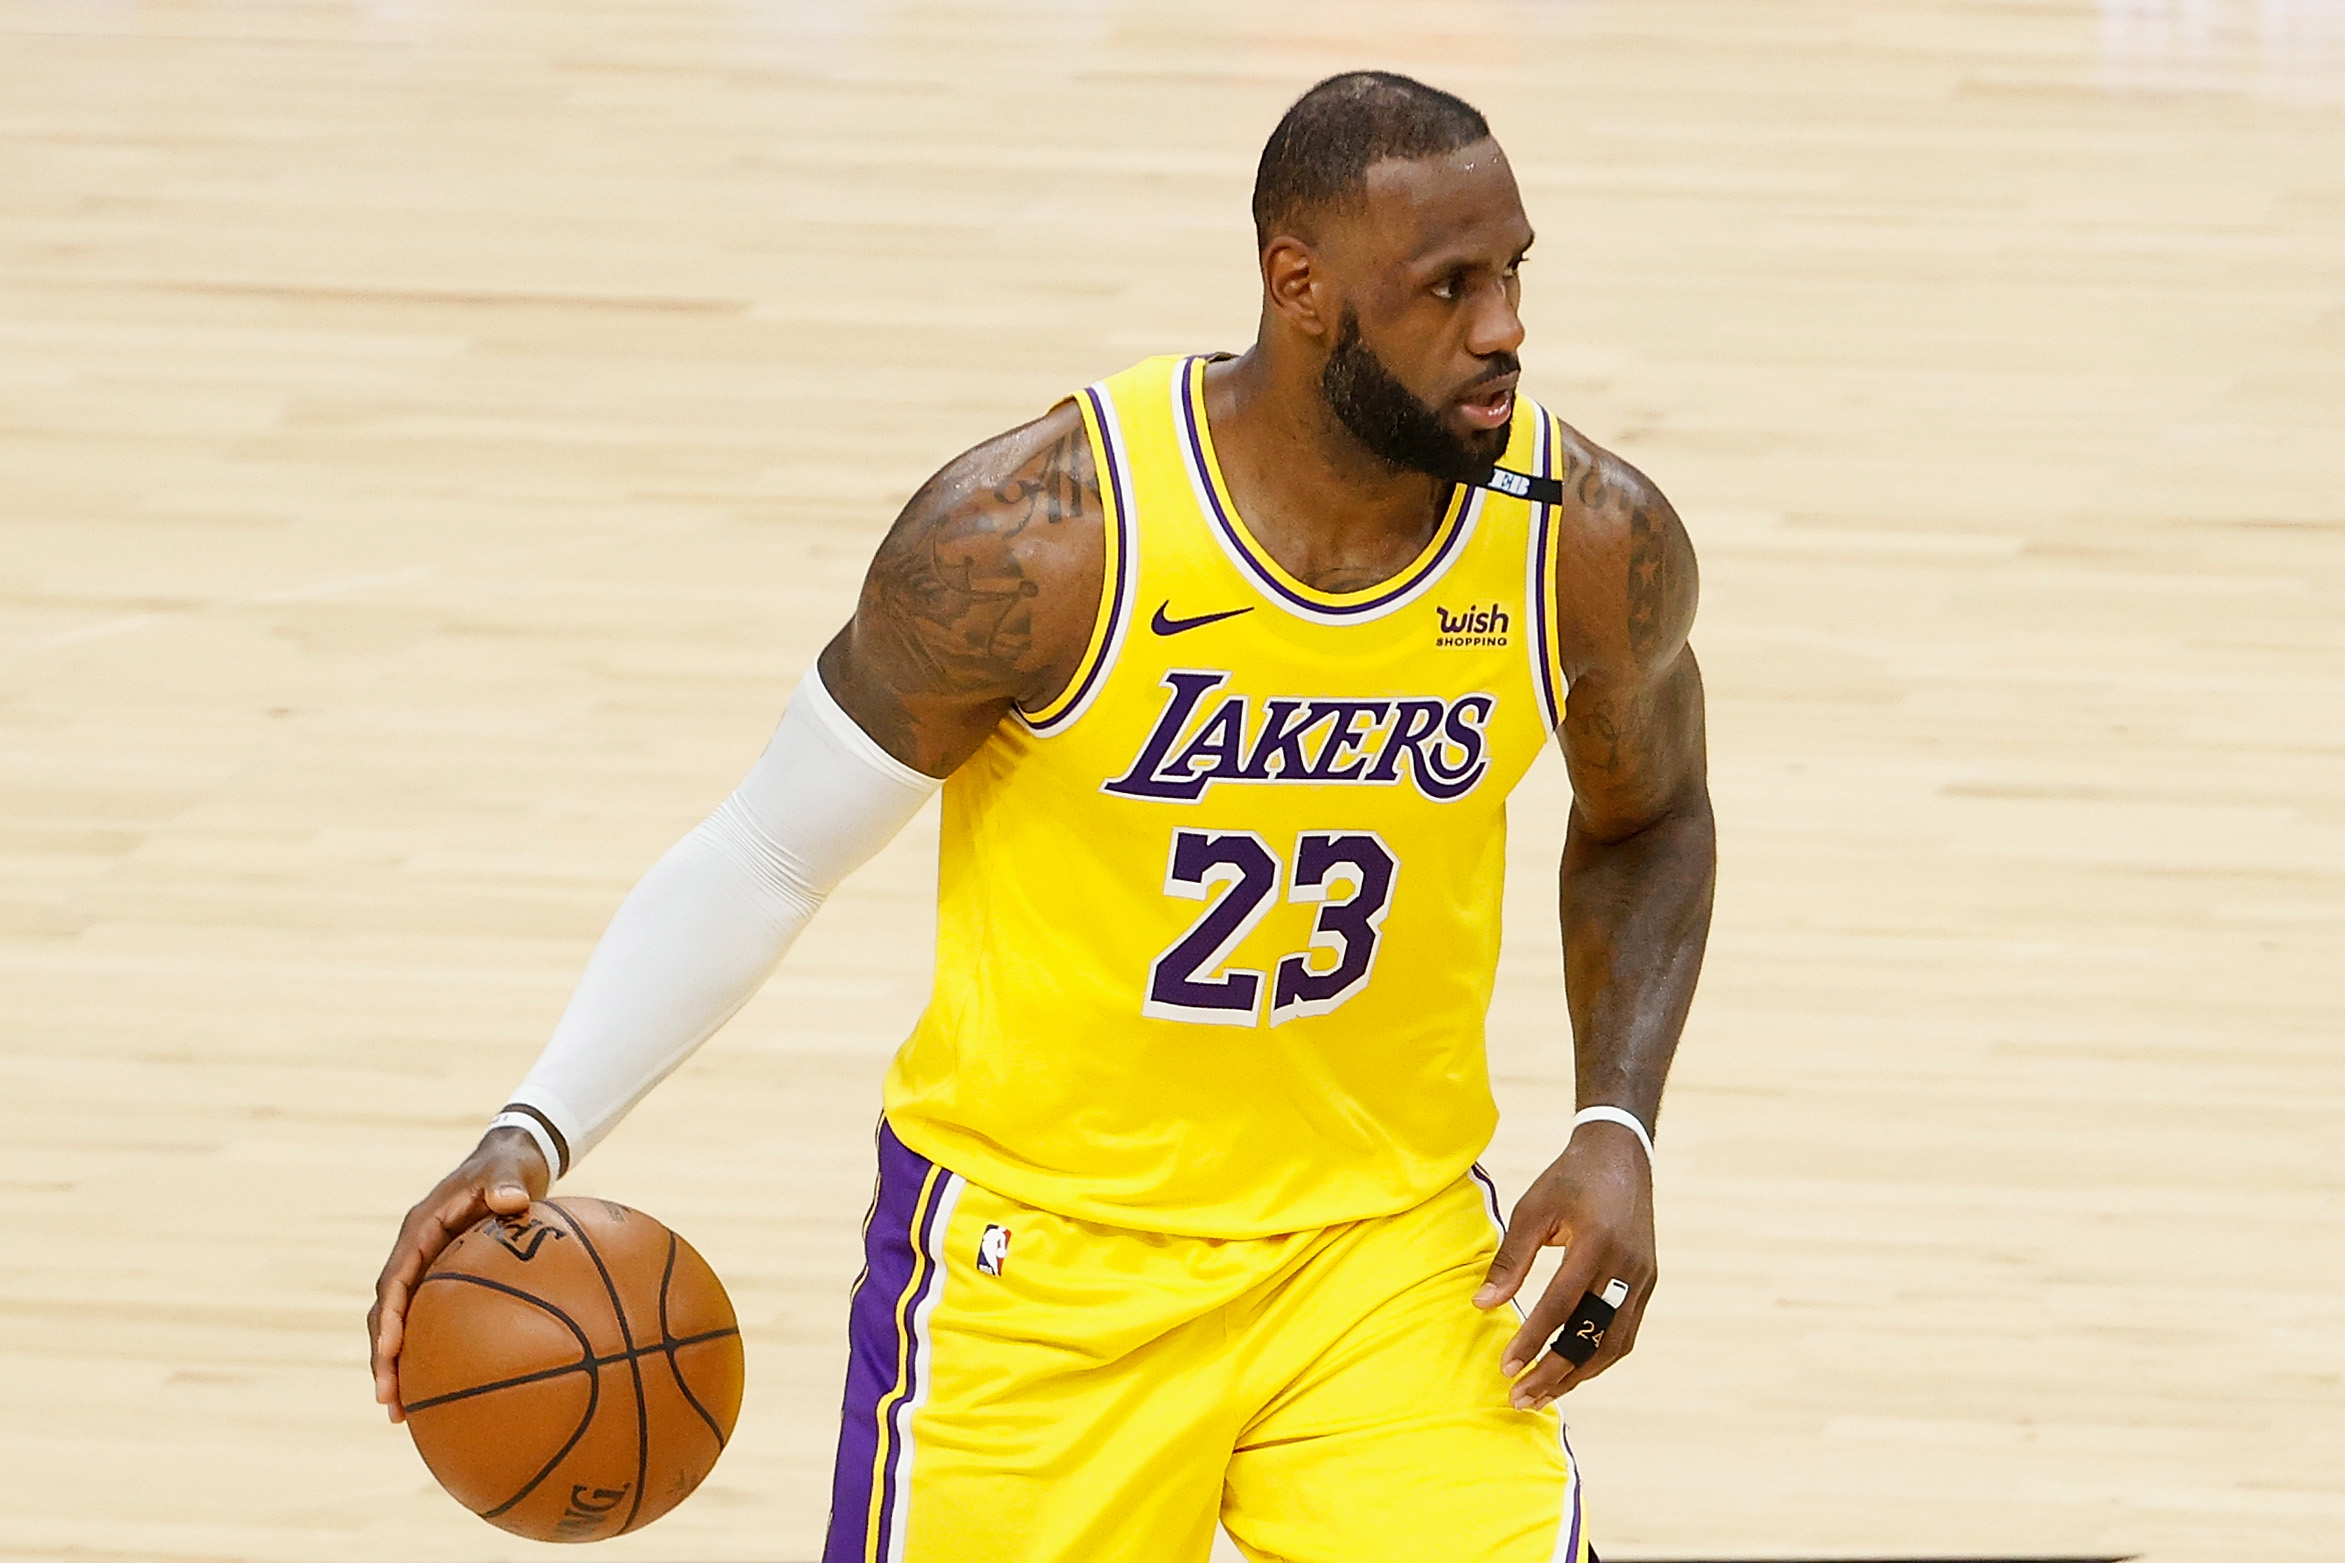 LeBron James confirms he was vaccinated for Covid-19 months after